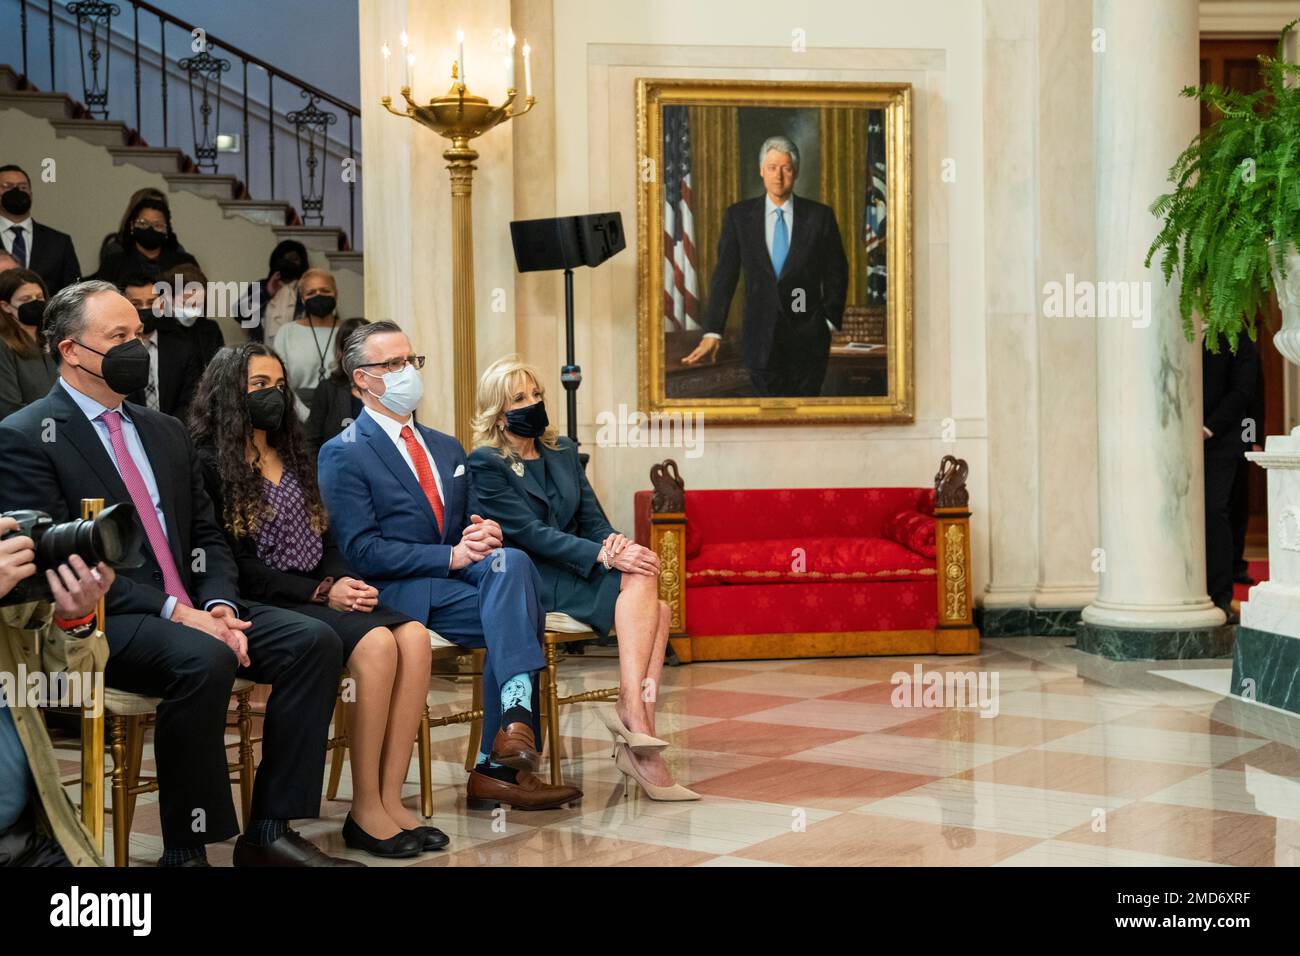 Reportage: Jill Biden and Second Gentleman Doug Emhoff watch with Judge Ketanji Brown Jackson’s husband and daughter while President Joe Biden delivers remarks on Judge Jackson’s nomination to the U.S. Supreme Court, Friday, February 25, 2022, in the Grand Foyer of the White House. Stock Photo